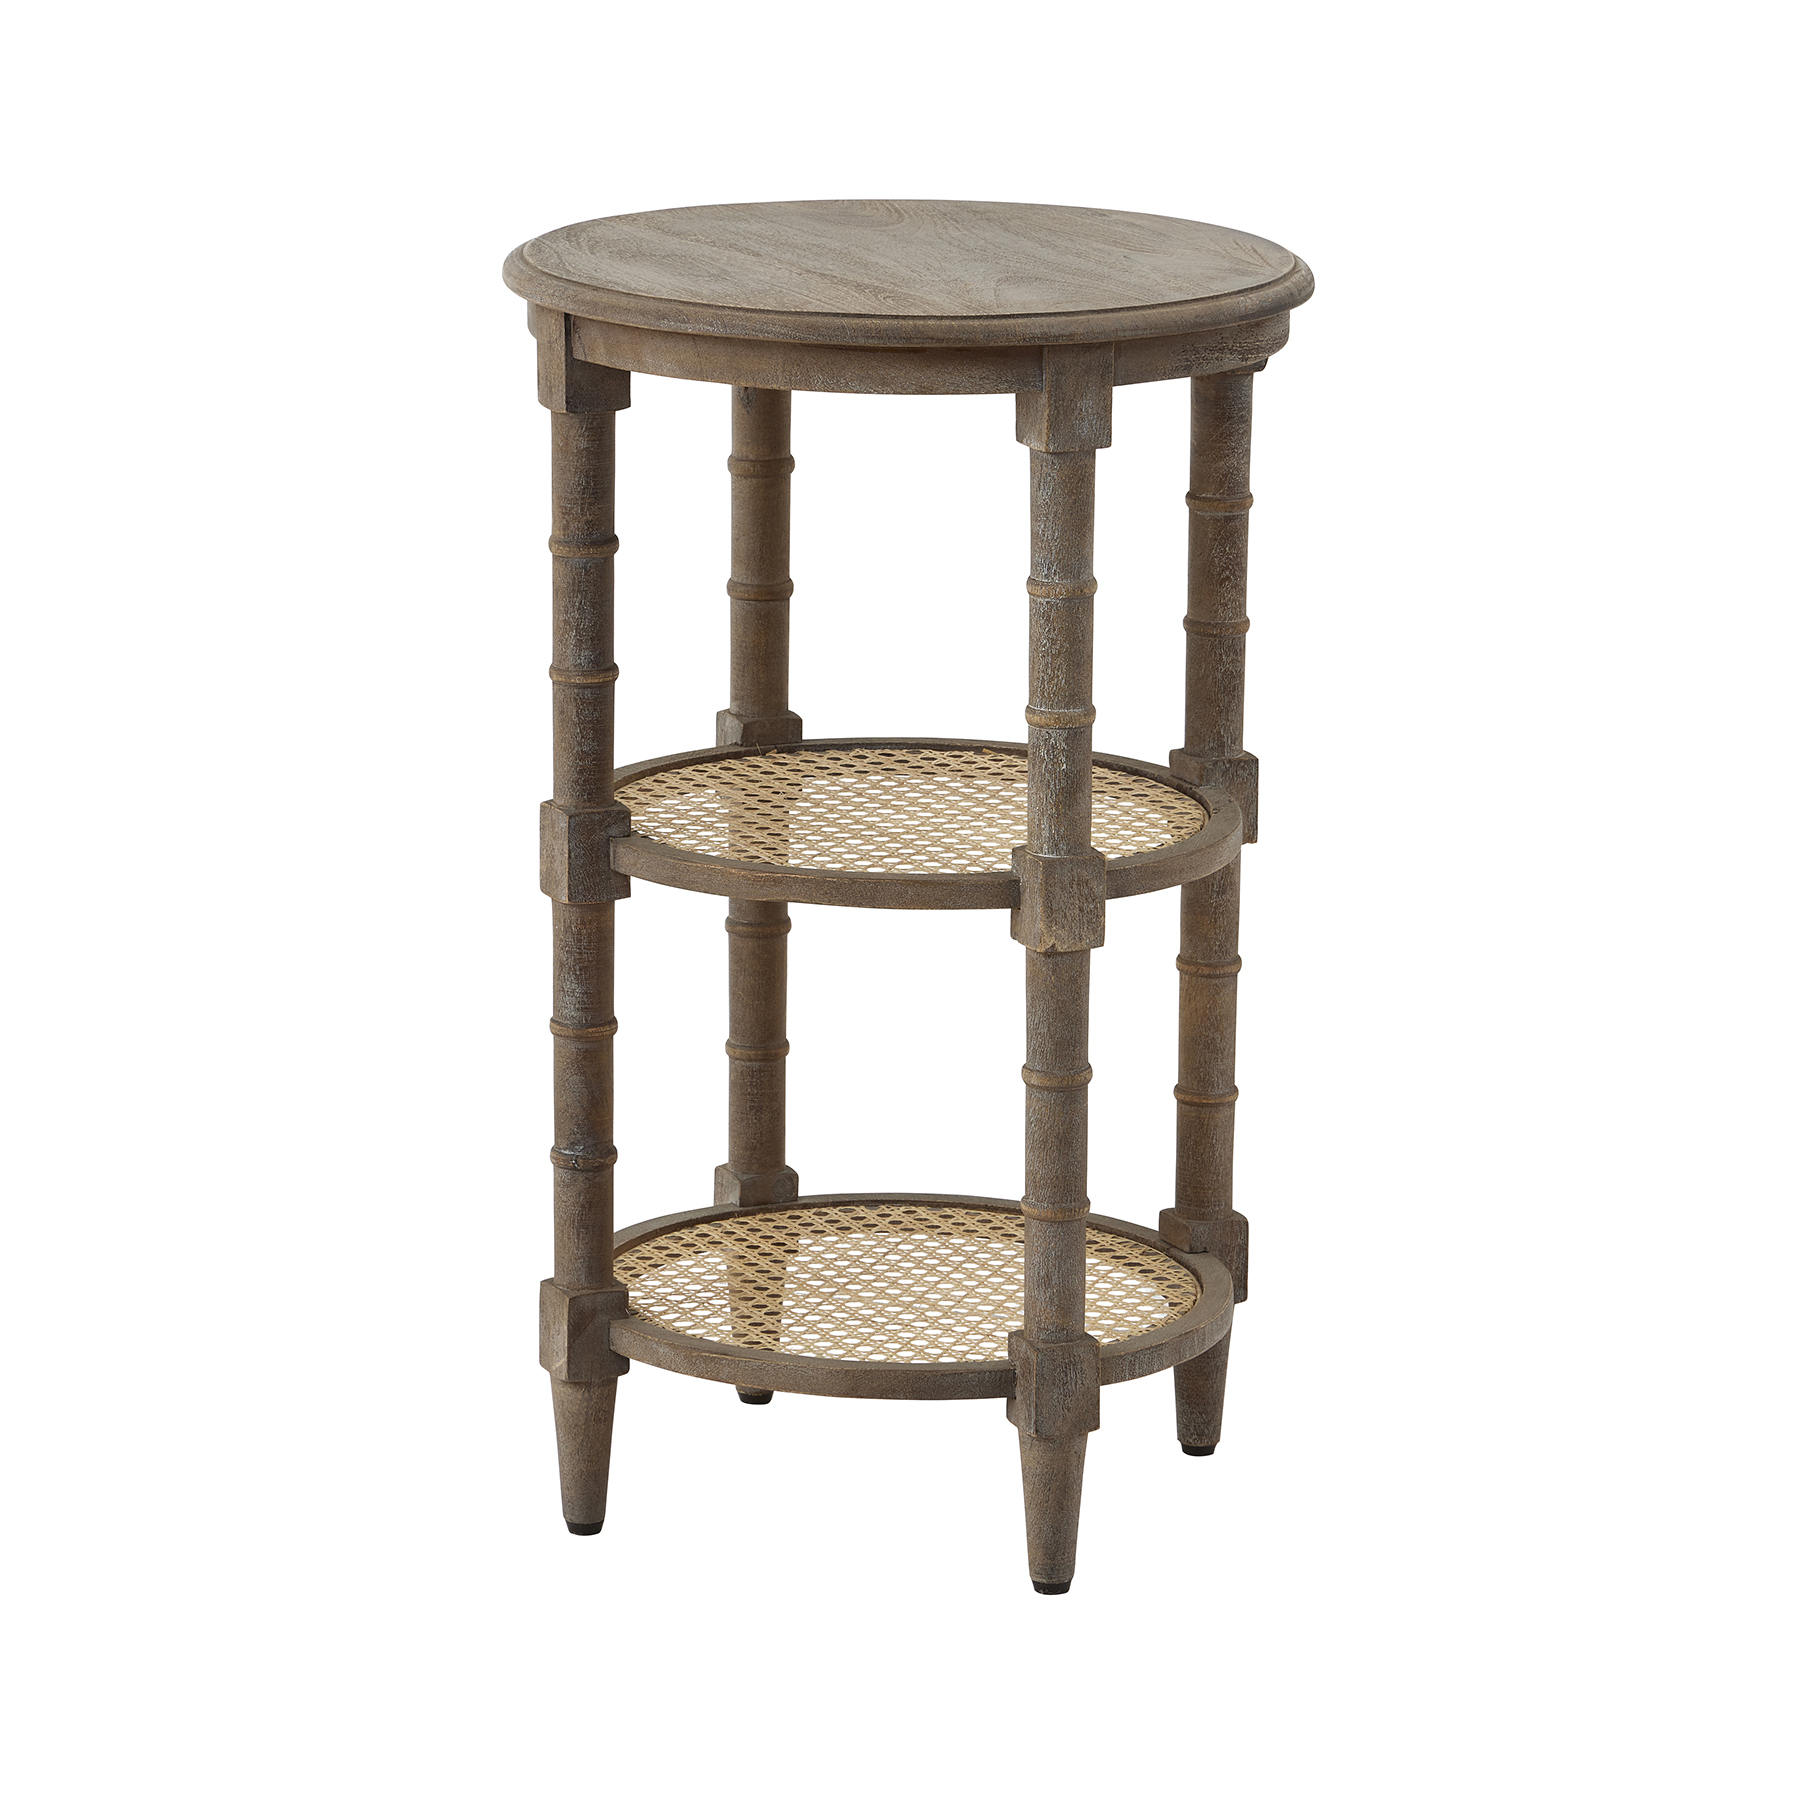 Raffles Tall Round Side Table - Image 1